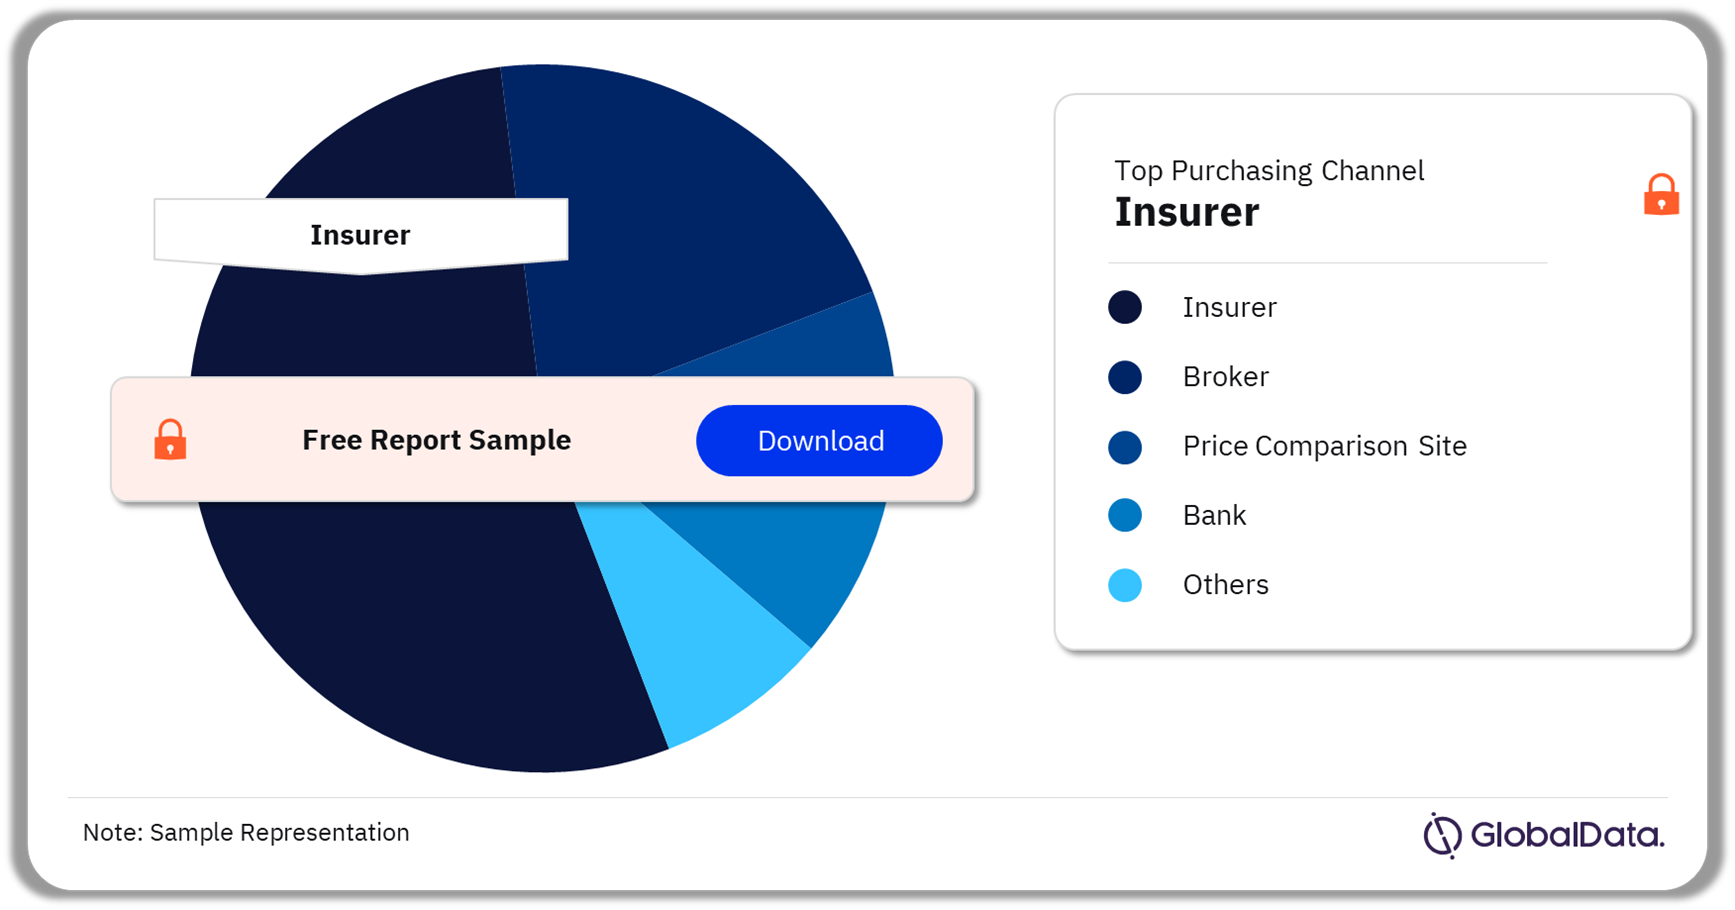 Private Medical Insurance Market Analysis by Purchasing Channels, 2021 (%)